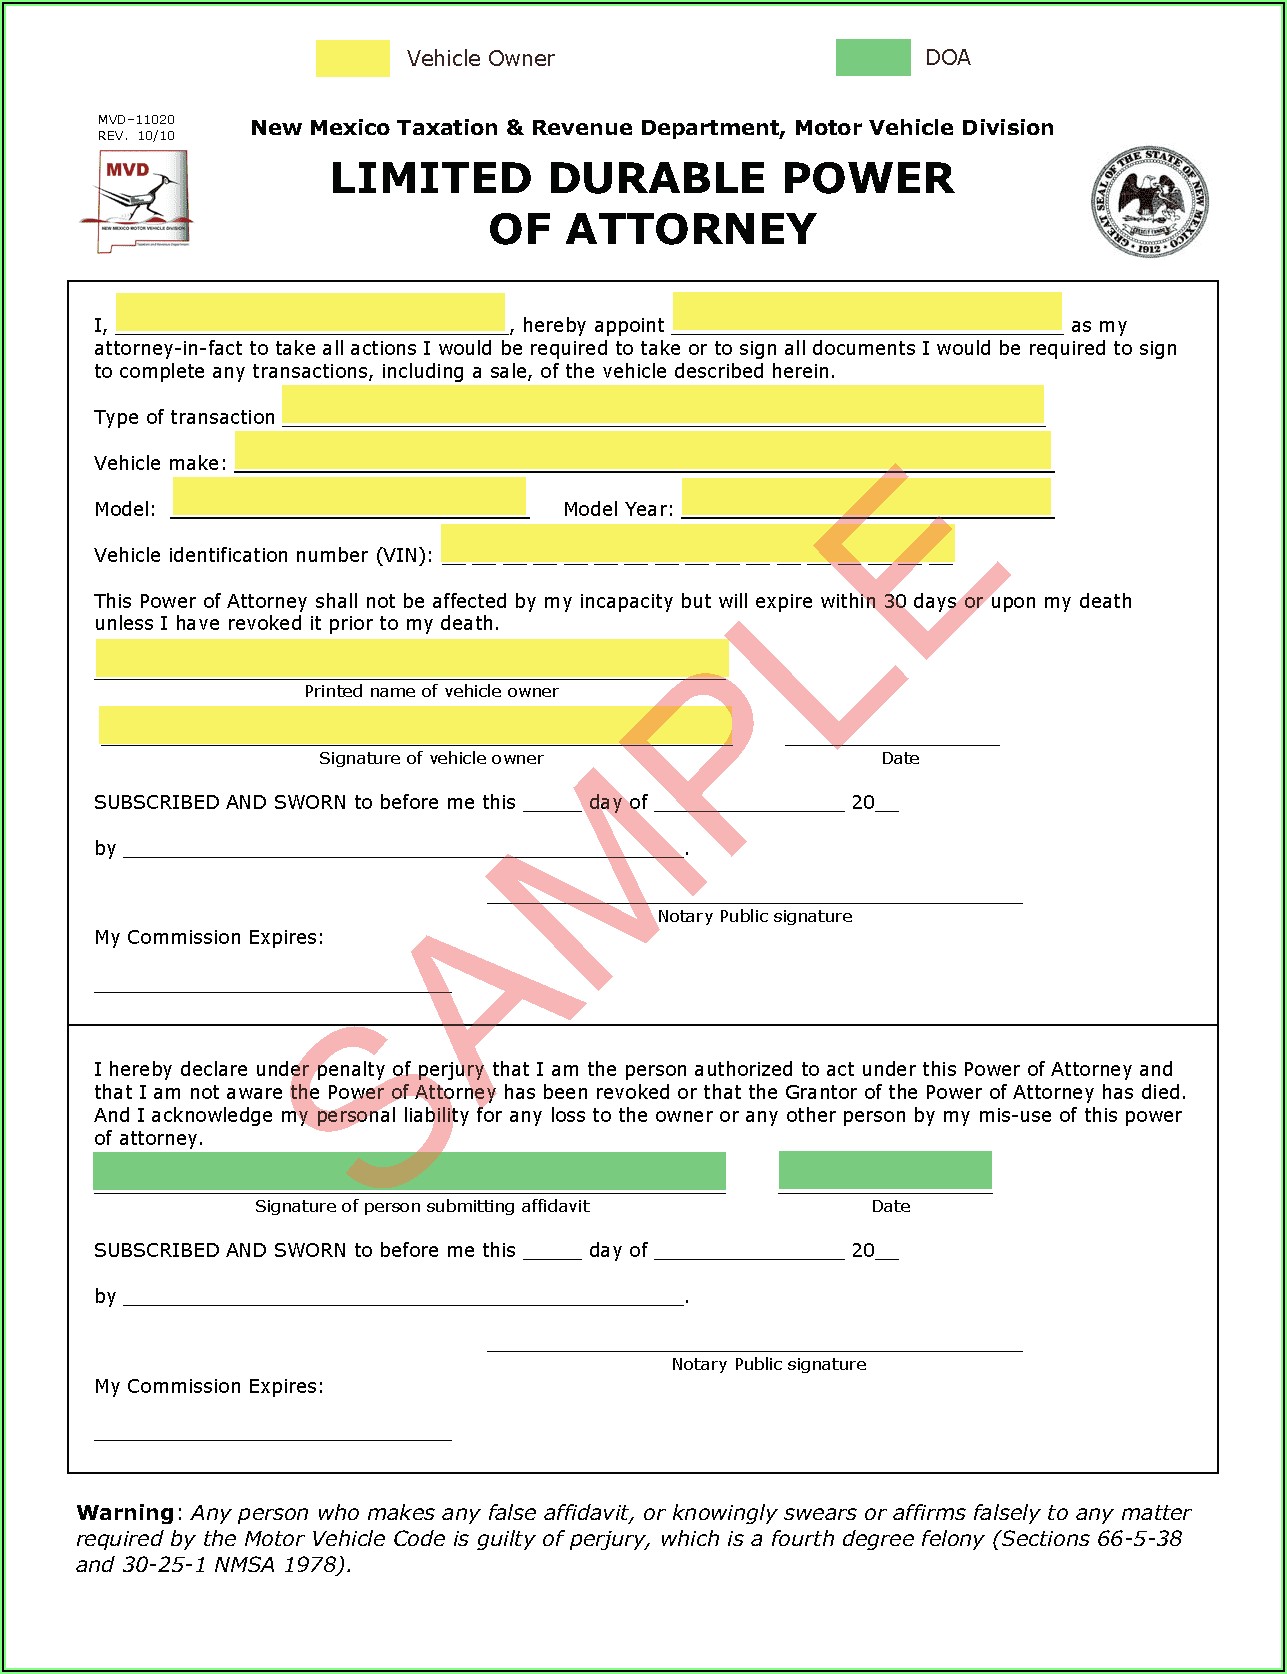 Where Can I Get A Blank Durable Power Of Attorney Form